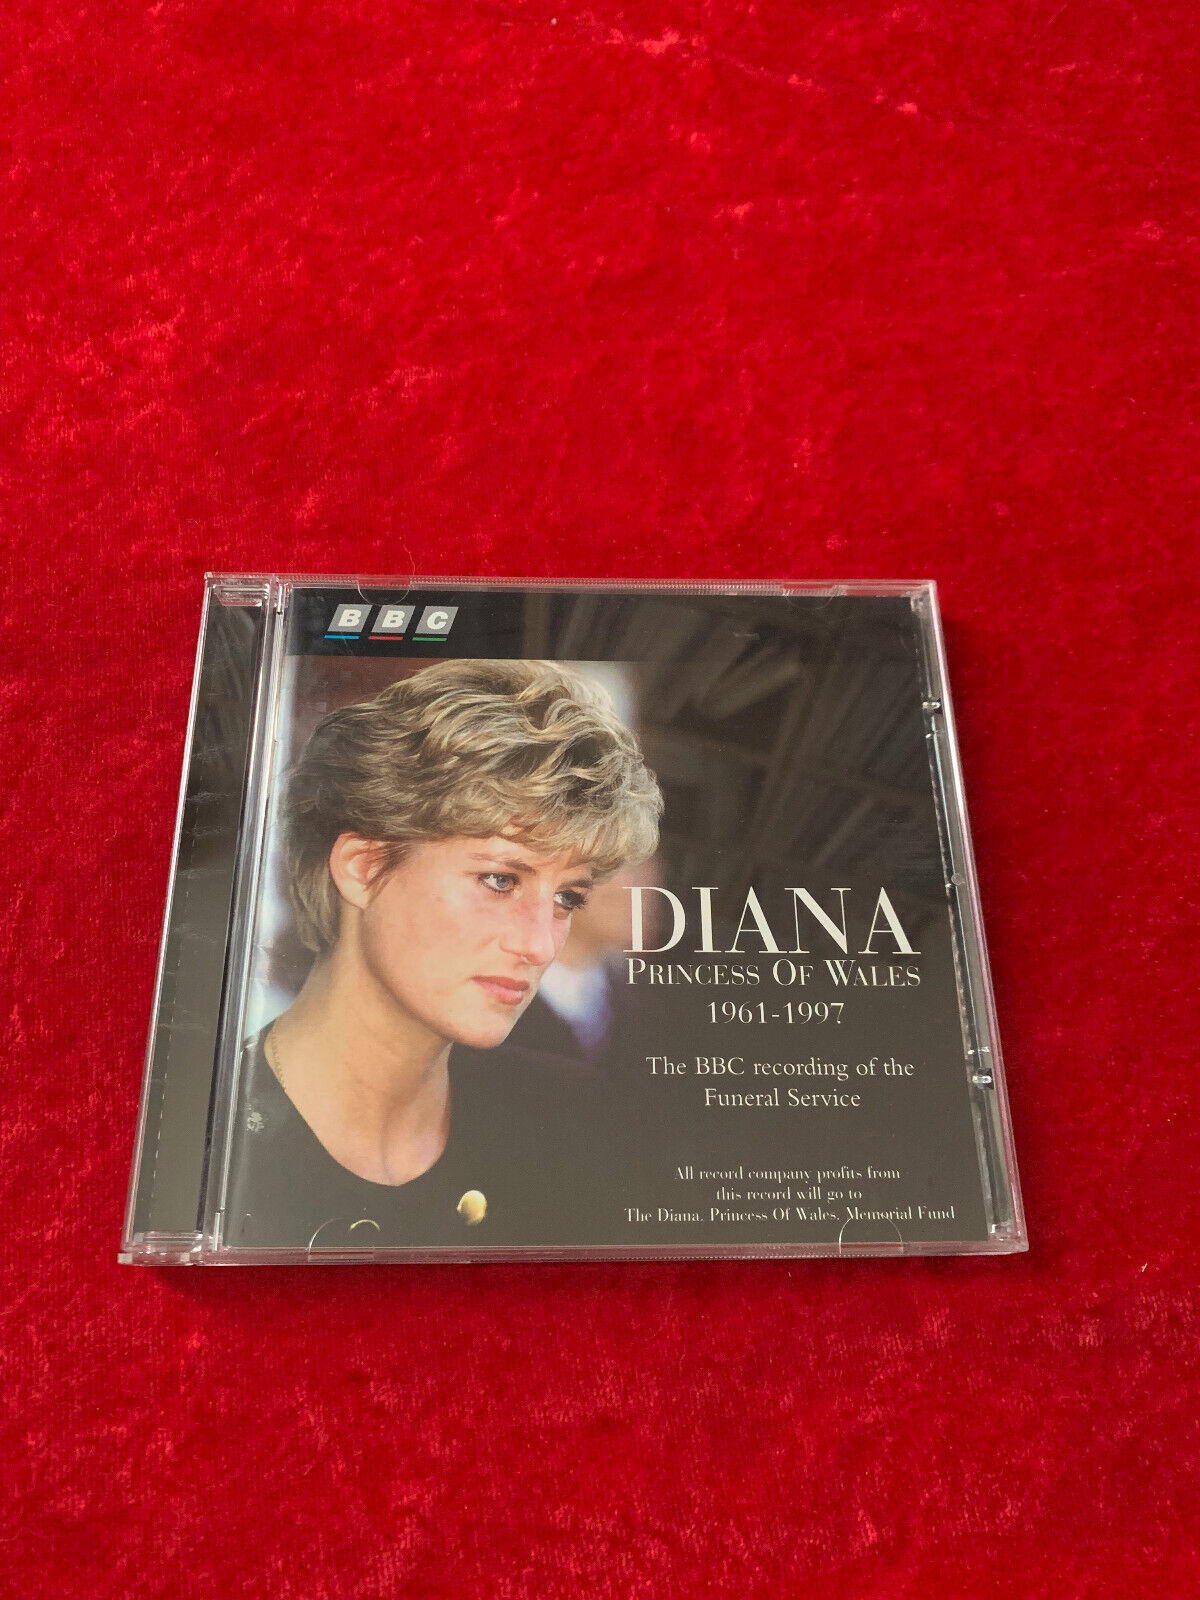 Diana Princess Of Wales 1961-1997 The BBC Recording Of The Funeral... CD album